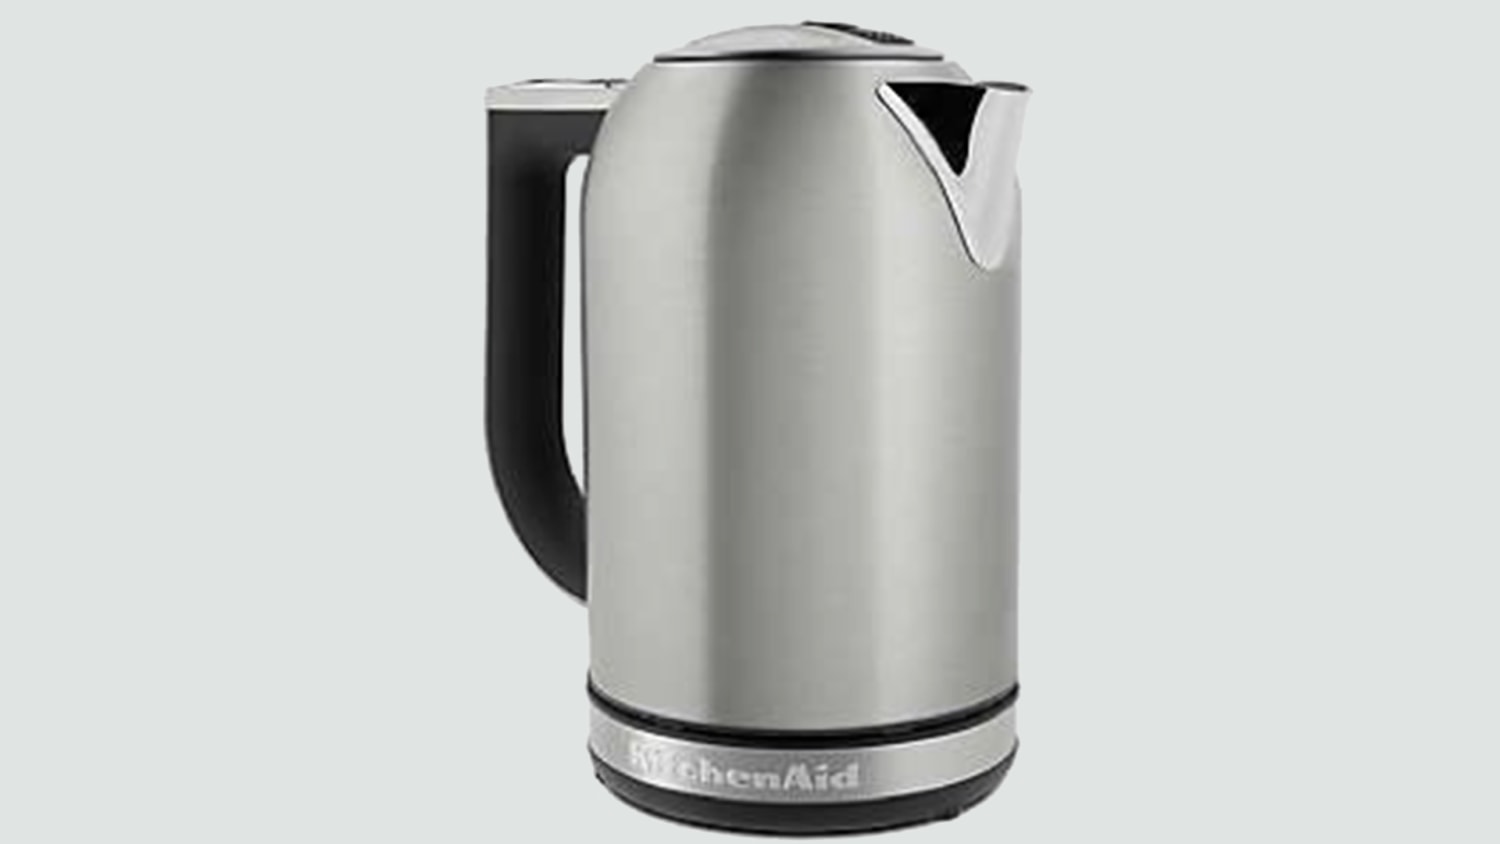 https://media-cldnry.s-nbcnews.com/image/upload/t_fit-1500w,f_auto,q_auto:best/newscms/2018_08/1320089/whirlpool-recalls-kitchenaid-electric-kettle-today-180222-tease.jpg